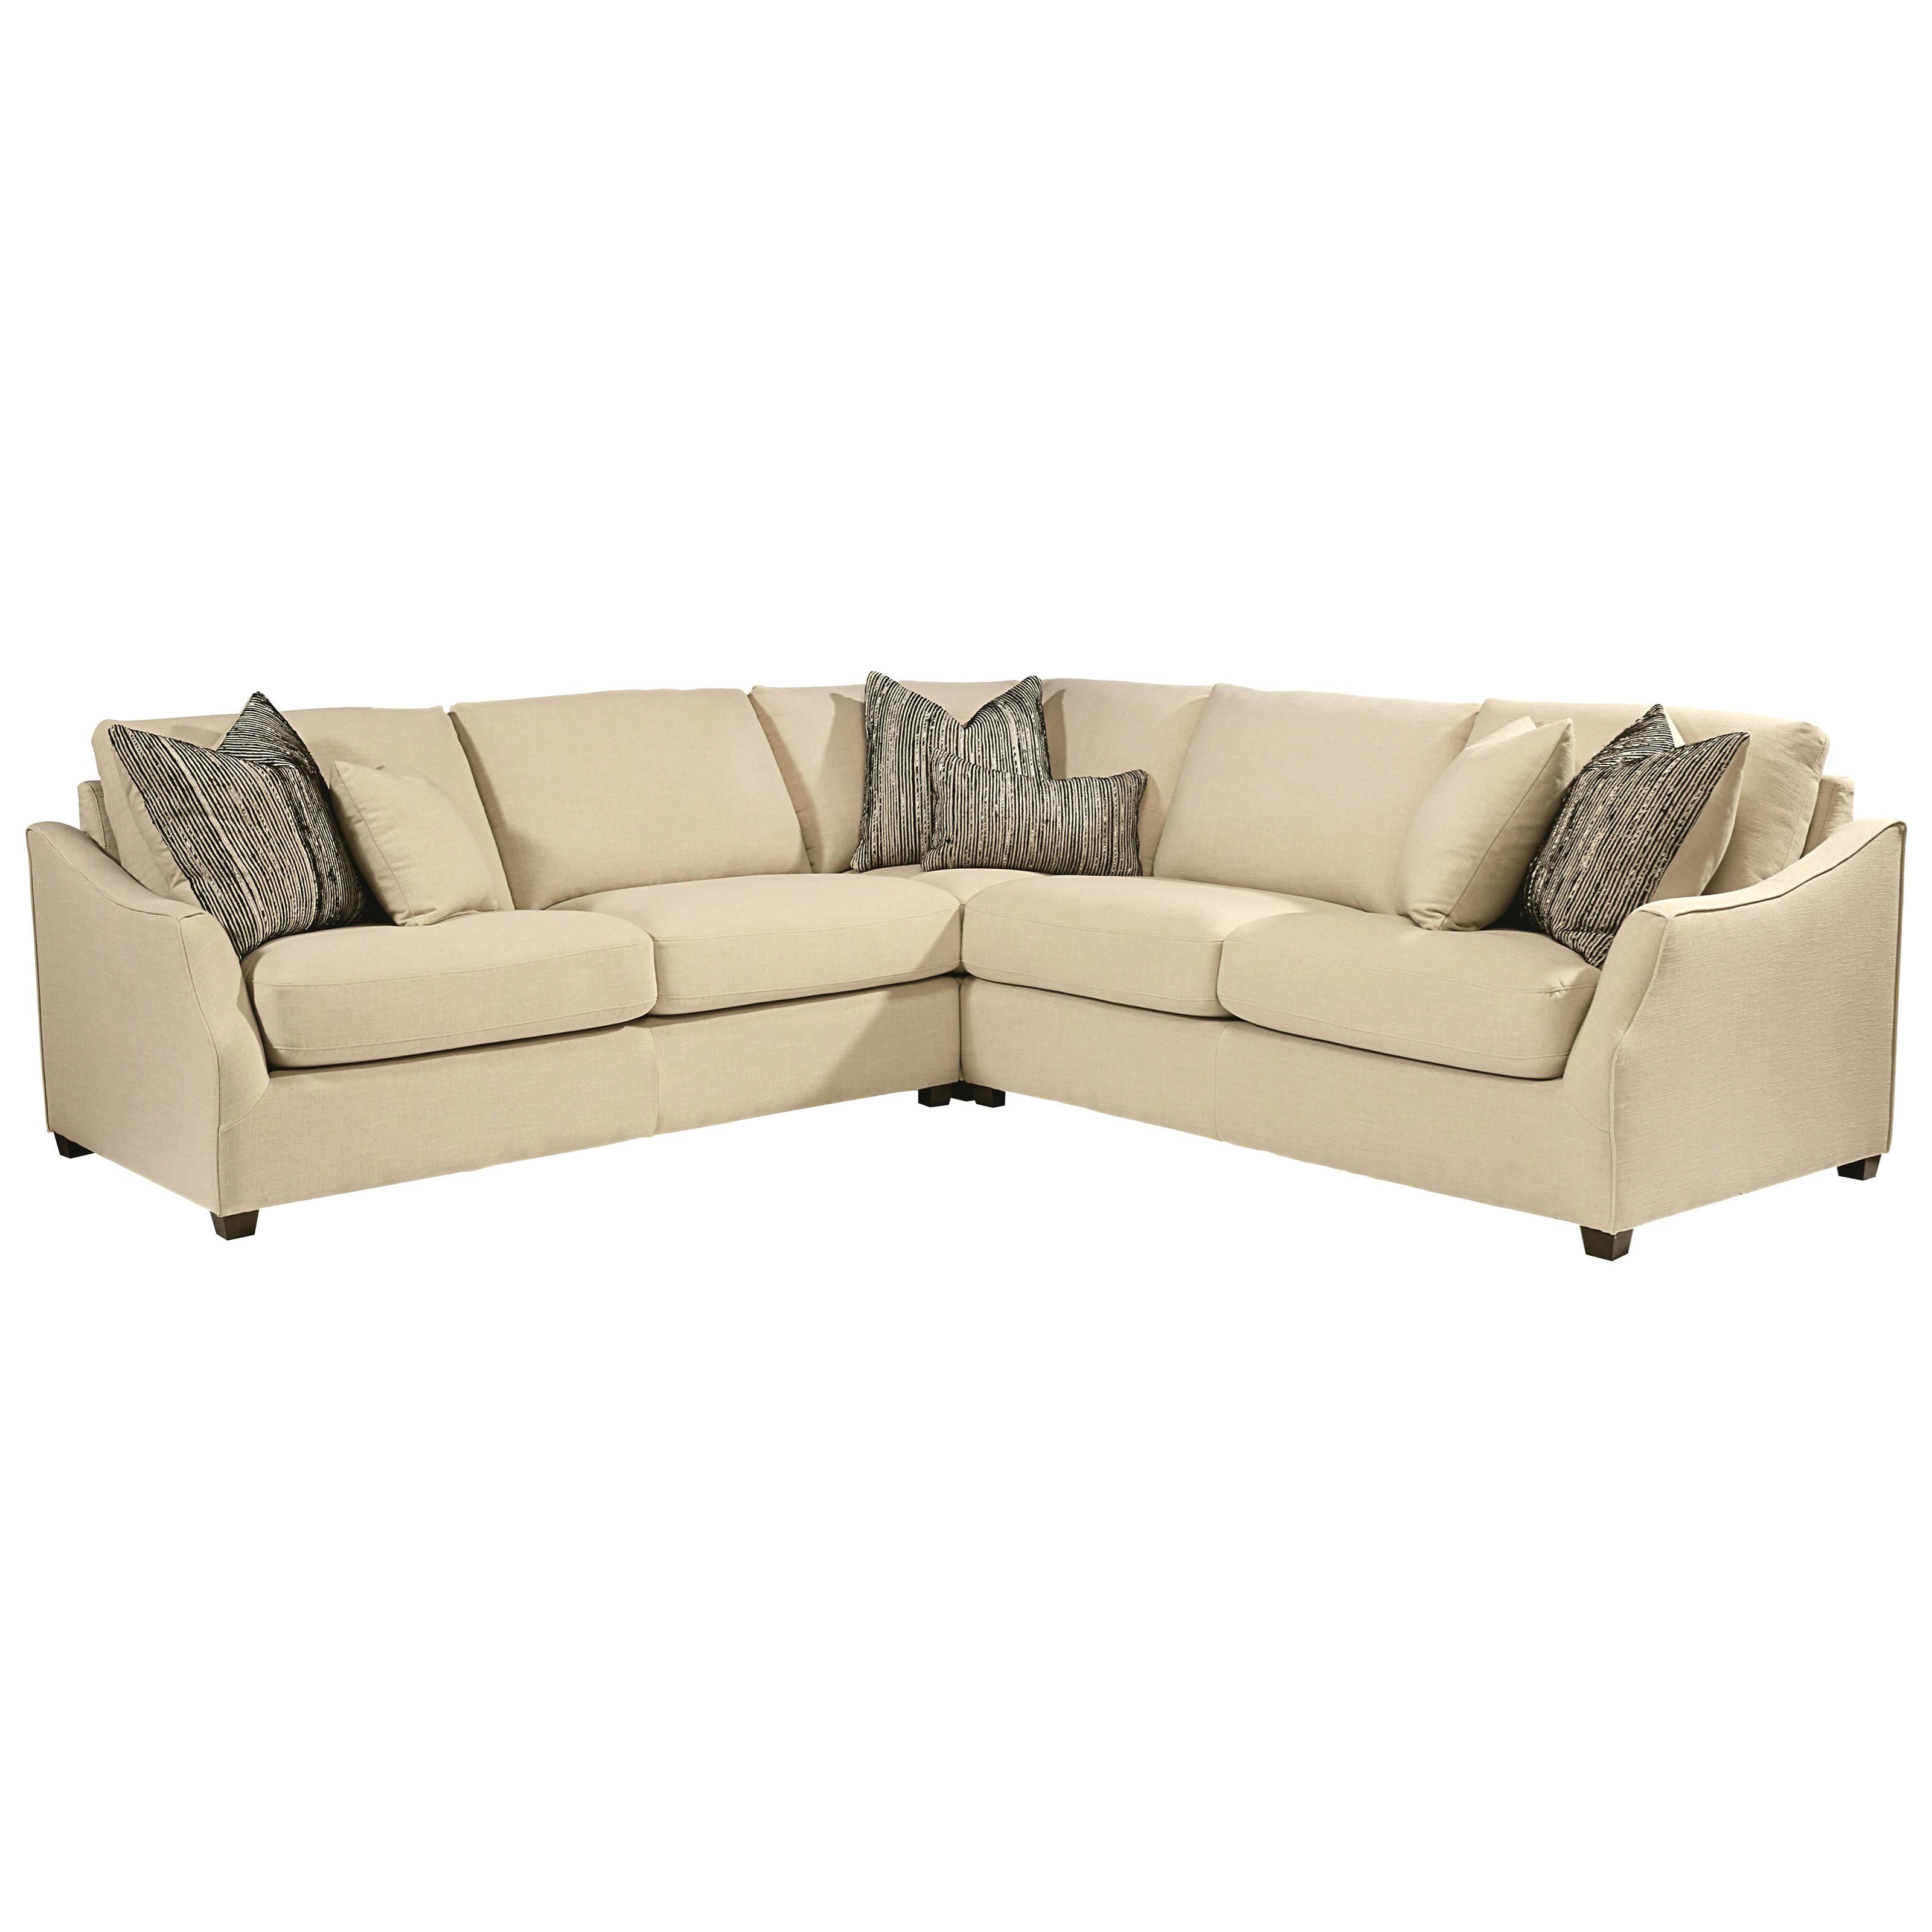 Joanna Gaines Sofa Magnolia Home Leather Sofa Chip Joanna Gaines With Regard To Magnolia Home Paradigm Sofa Chairs By Joanna Gaines (View 12 of 25)